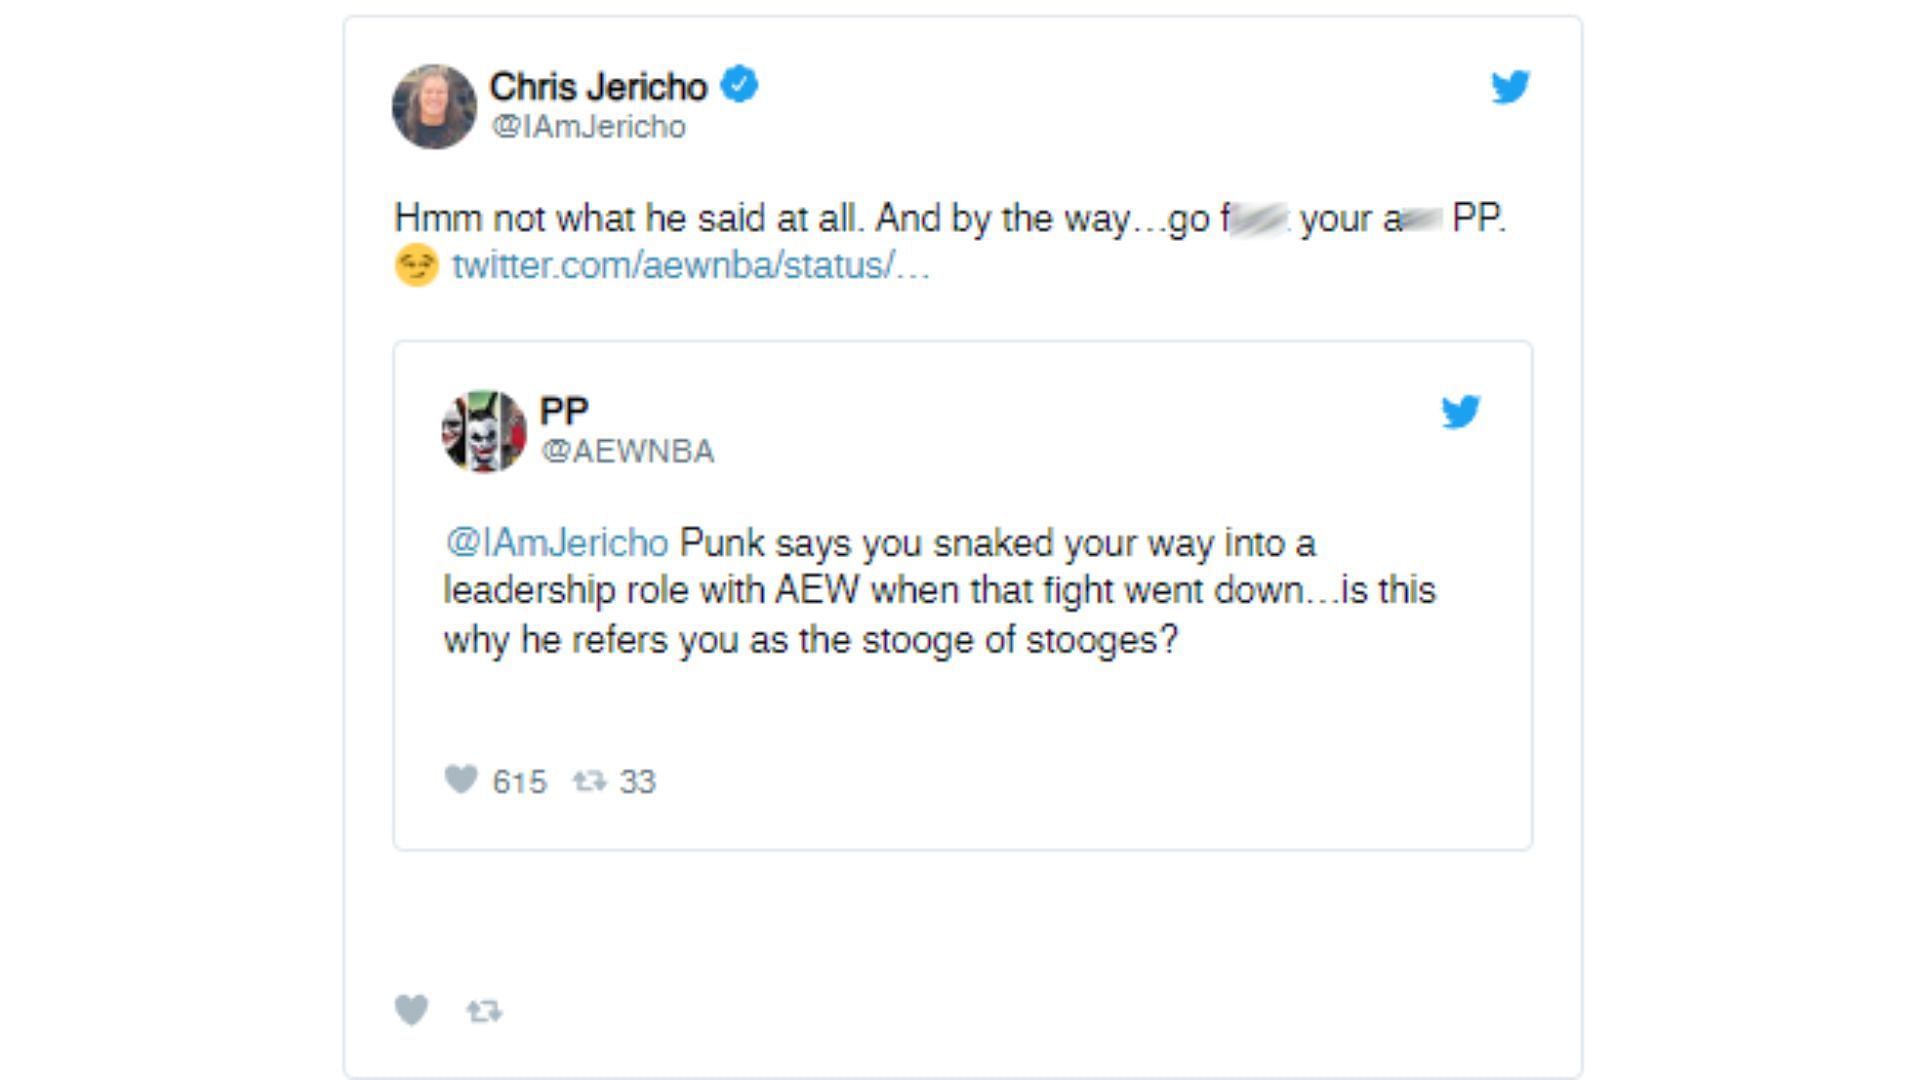 Chris Jericho responds to claims that he 